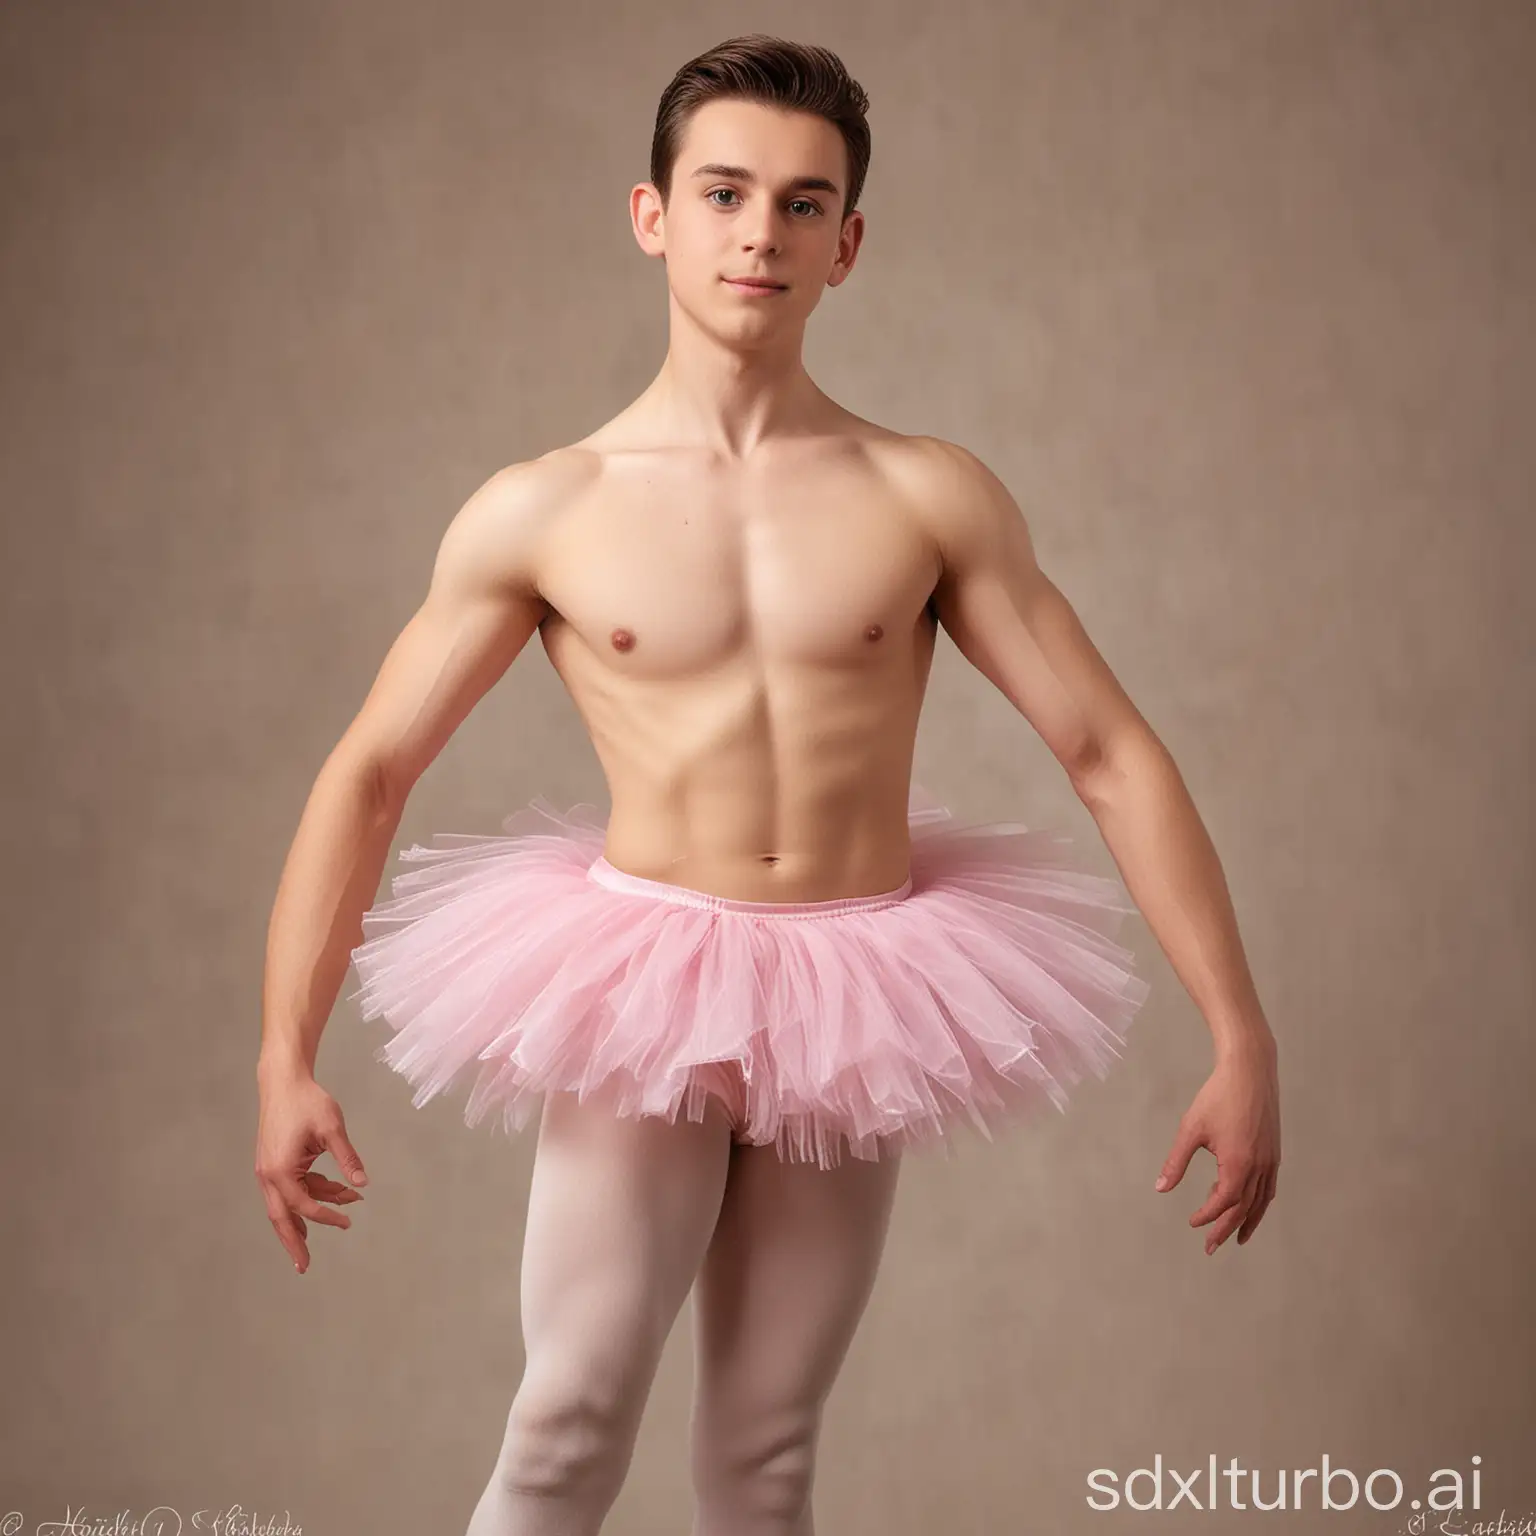 Graceful-Young-Man-Challenges-Gender-Norms-in-Pink-Tutu-and-Pointe-Shoes